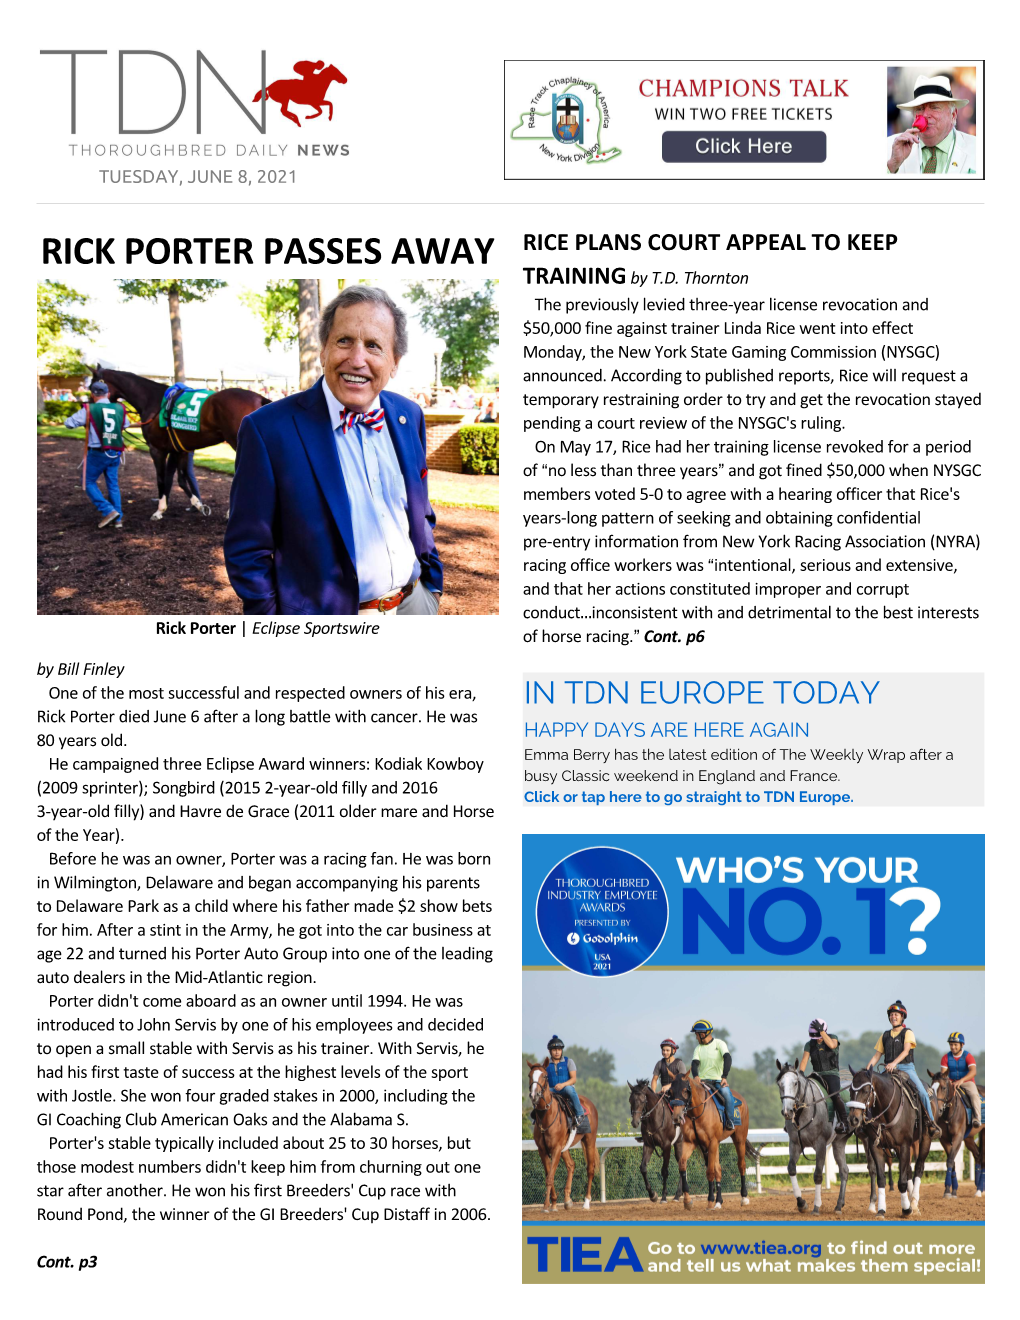 RICK PORTER PASSES AWAY RICE PLANS COURT APPEAL to KEEP TRAINING by T.D